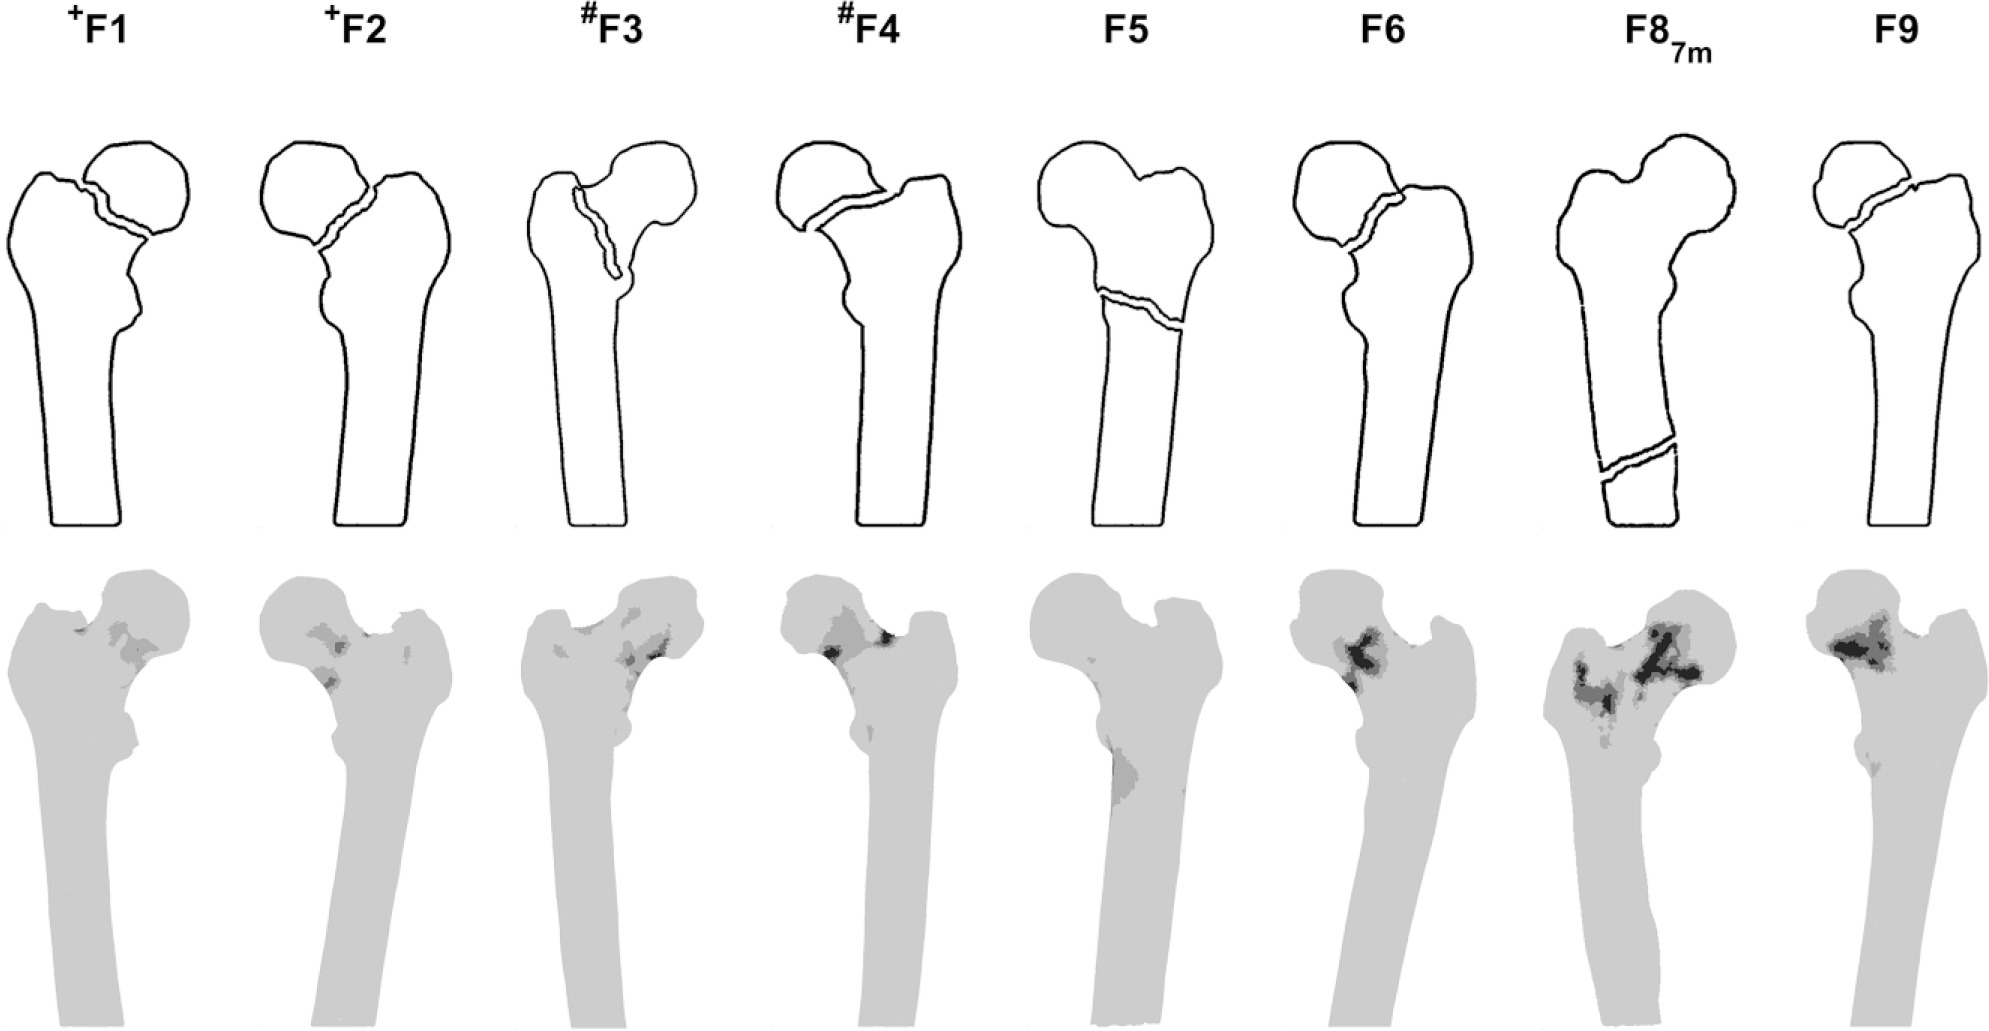 Fig. 3 
            Schematic overview of clinical fracture locations (upper panel), indicated by an experienced clinician who was blind to the predicted fracture locations, and the fracture locations at failure (mid-coronal plane) predicted by the finite element models (lower panel). Femurs indicated with + and # are paired femurs. F8 fractured one month after follow-up (7m). There was no clinical information about fracture location available for F7.
          